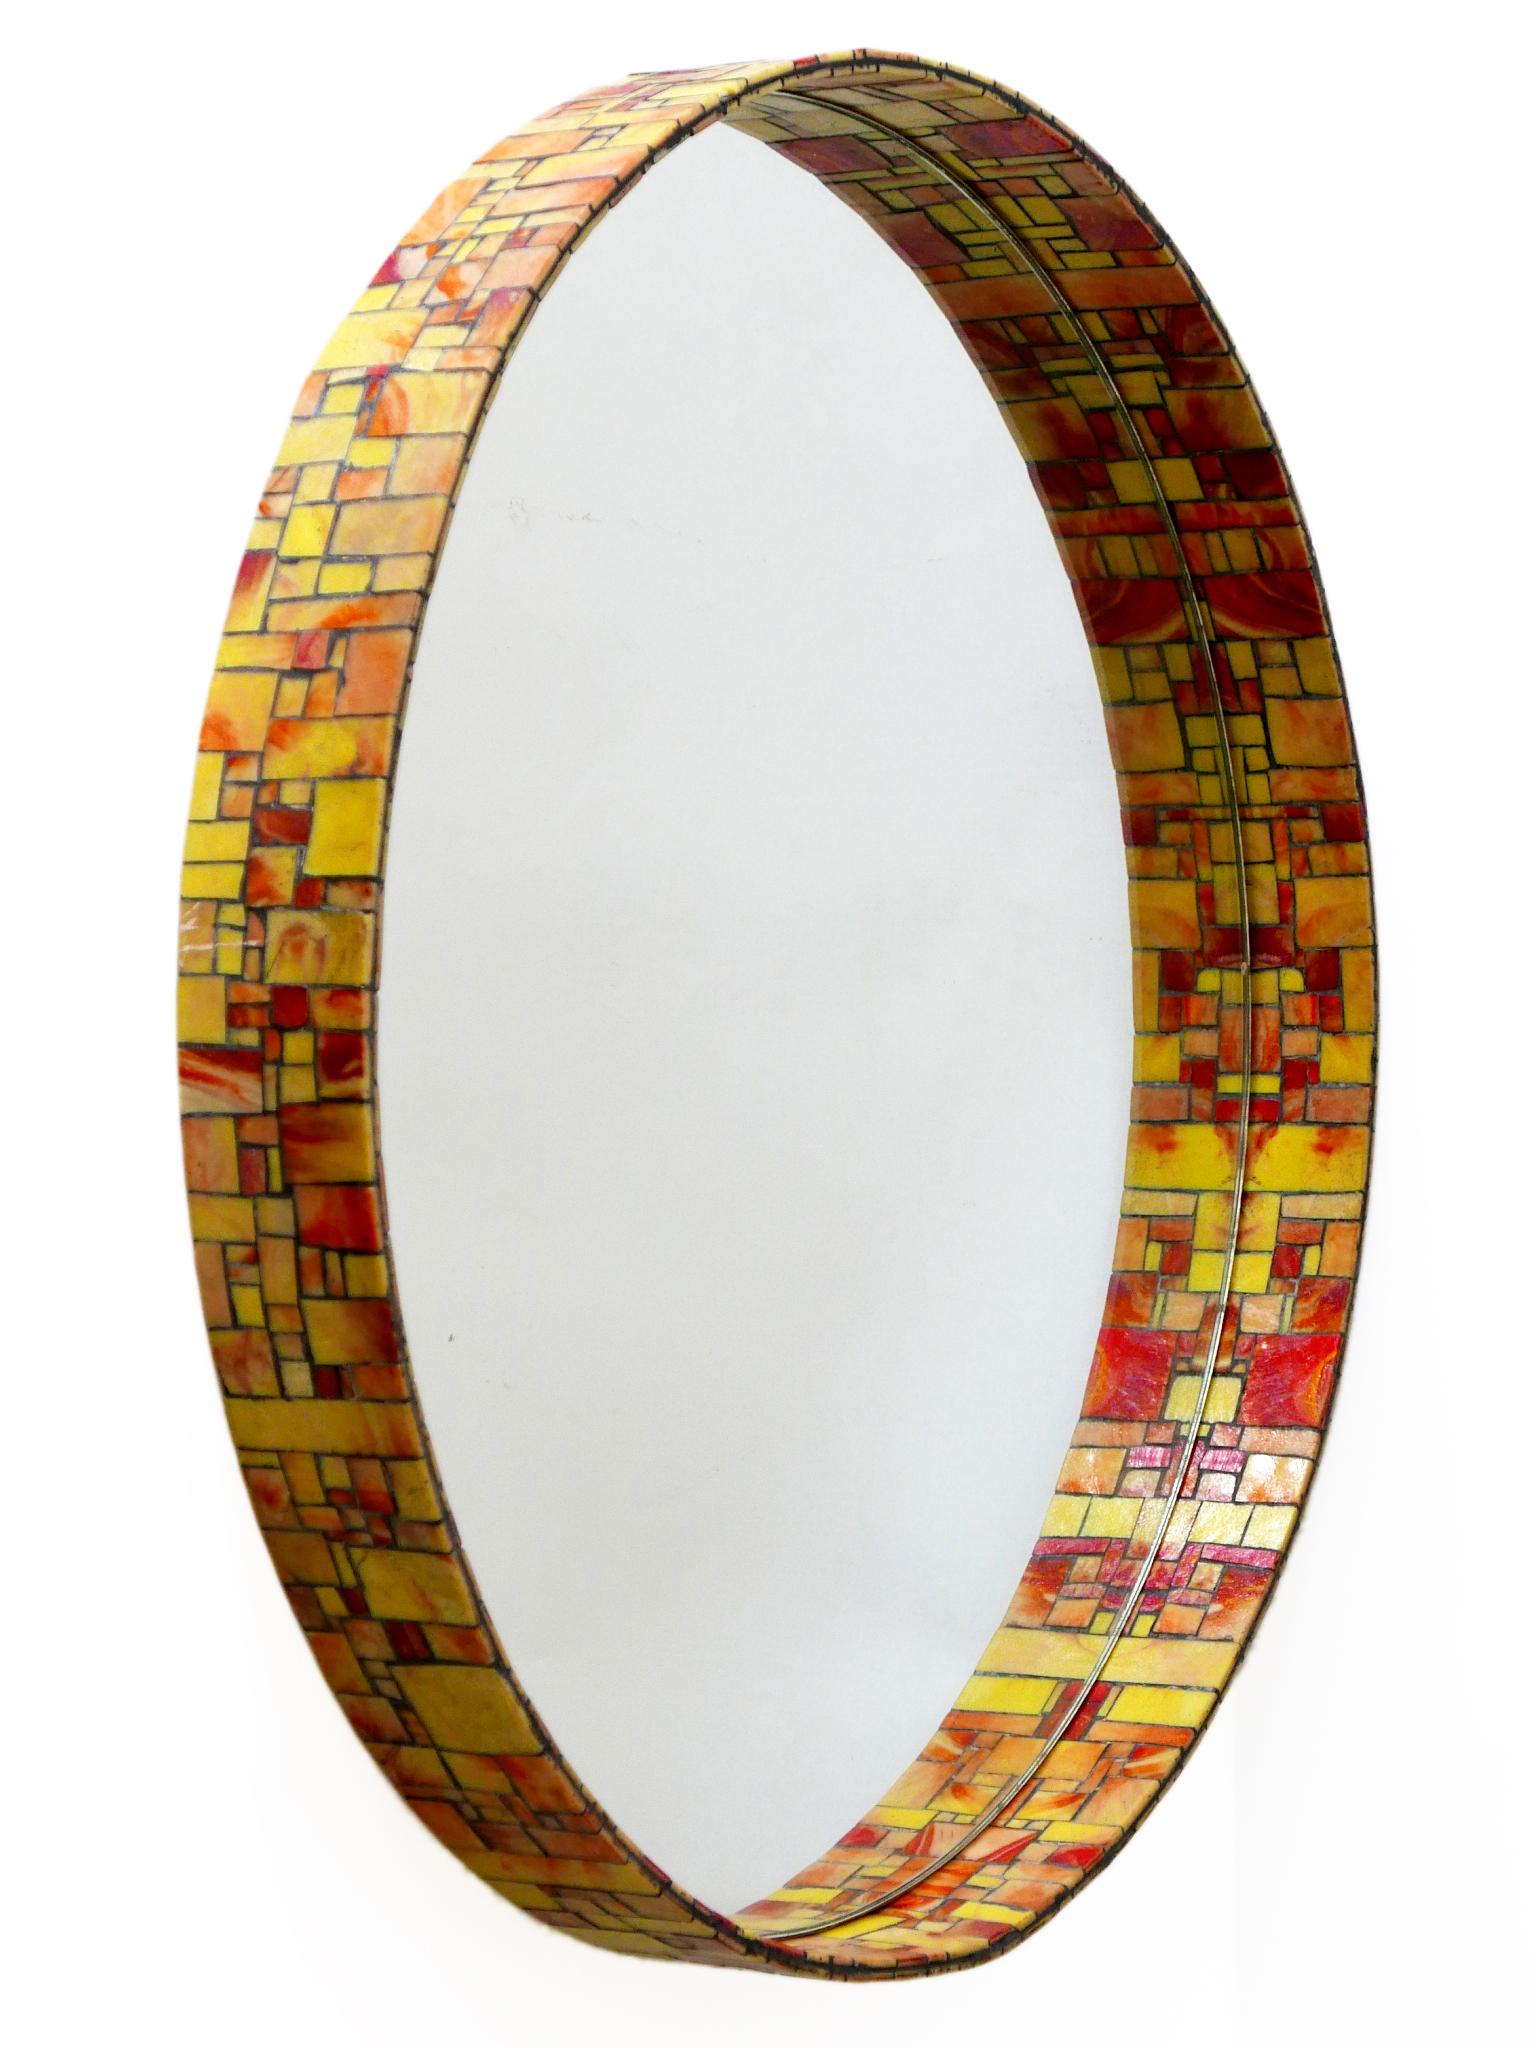 Exceptional Mid-Century Modern Mosaic Framed Circular Wall Mirror, Italy, 1960s For Sale 2